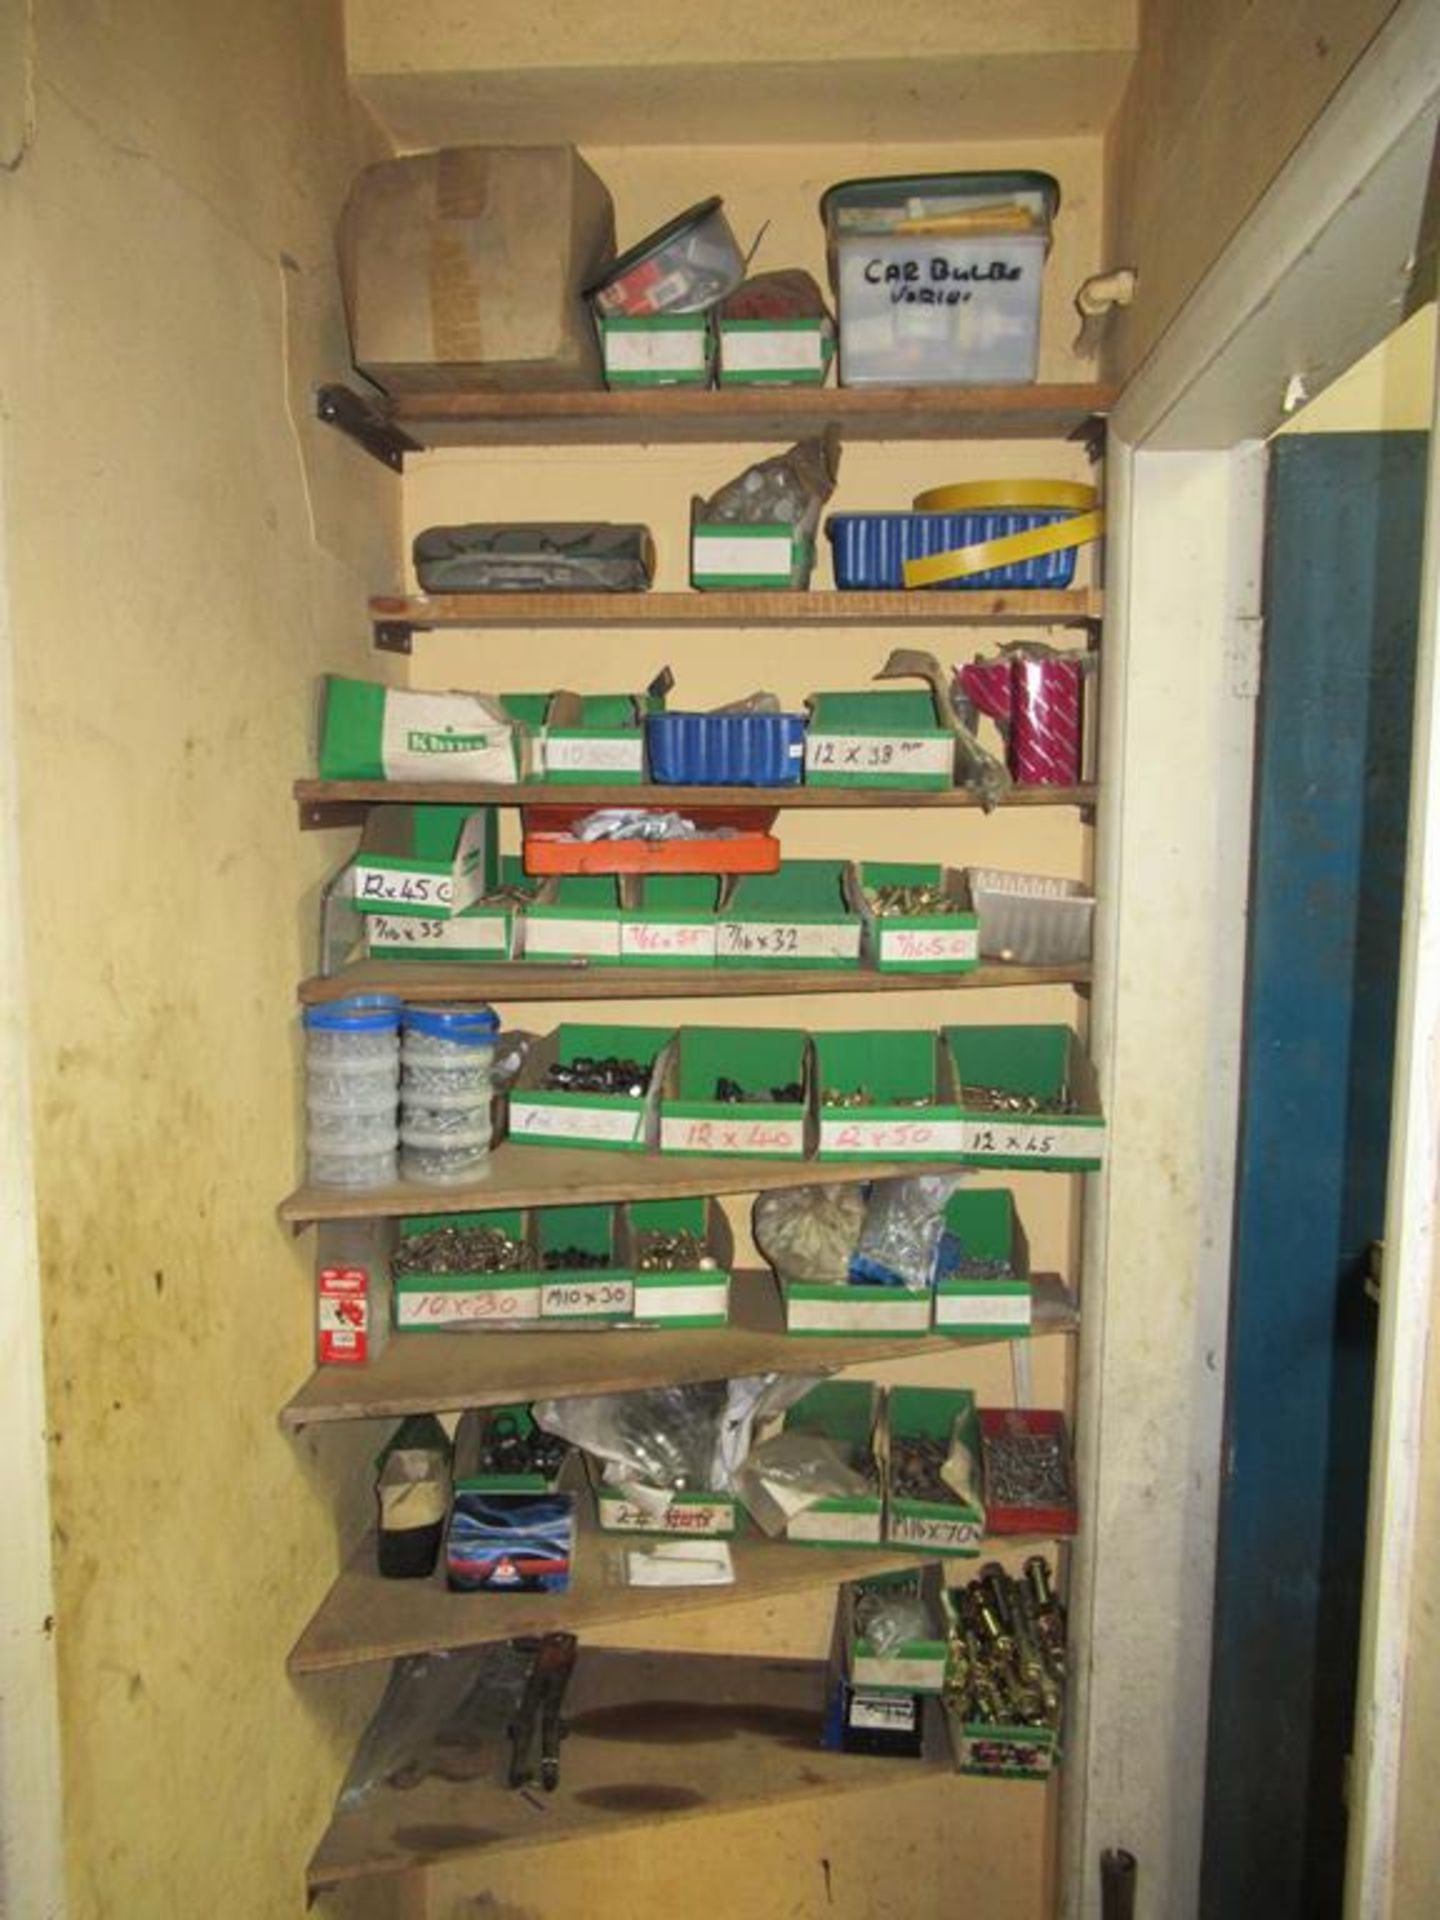 Contents of spares/store room - Image 5 of 6